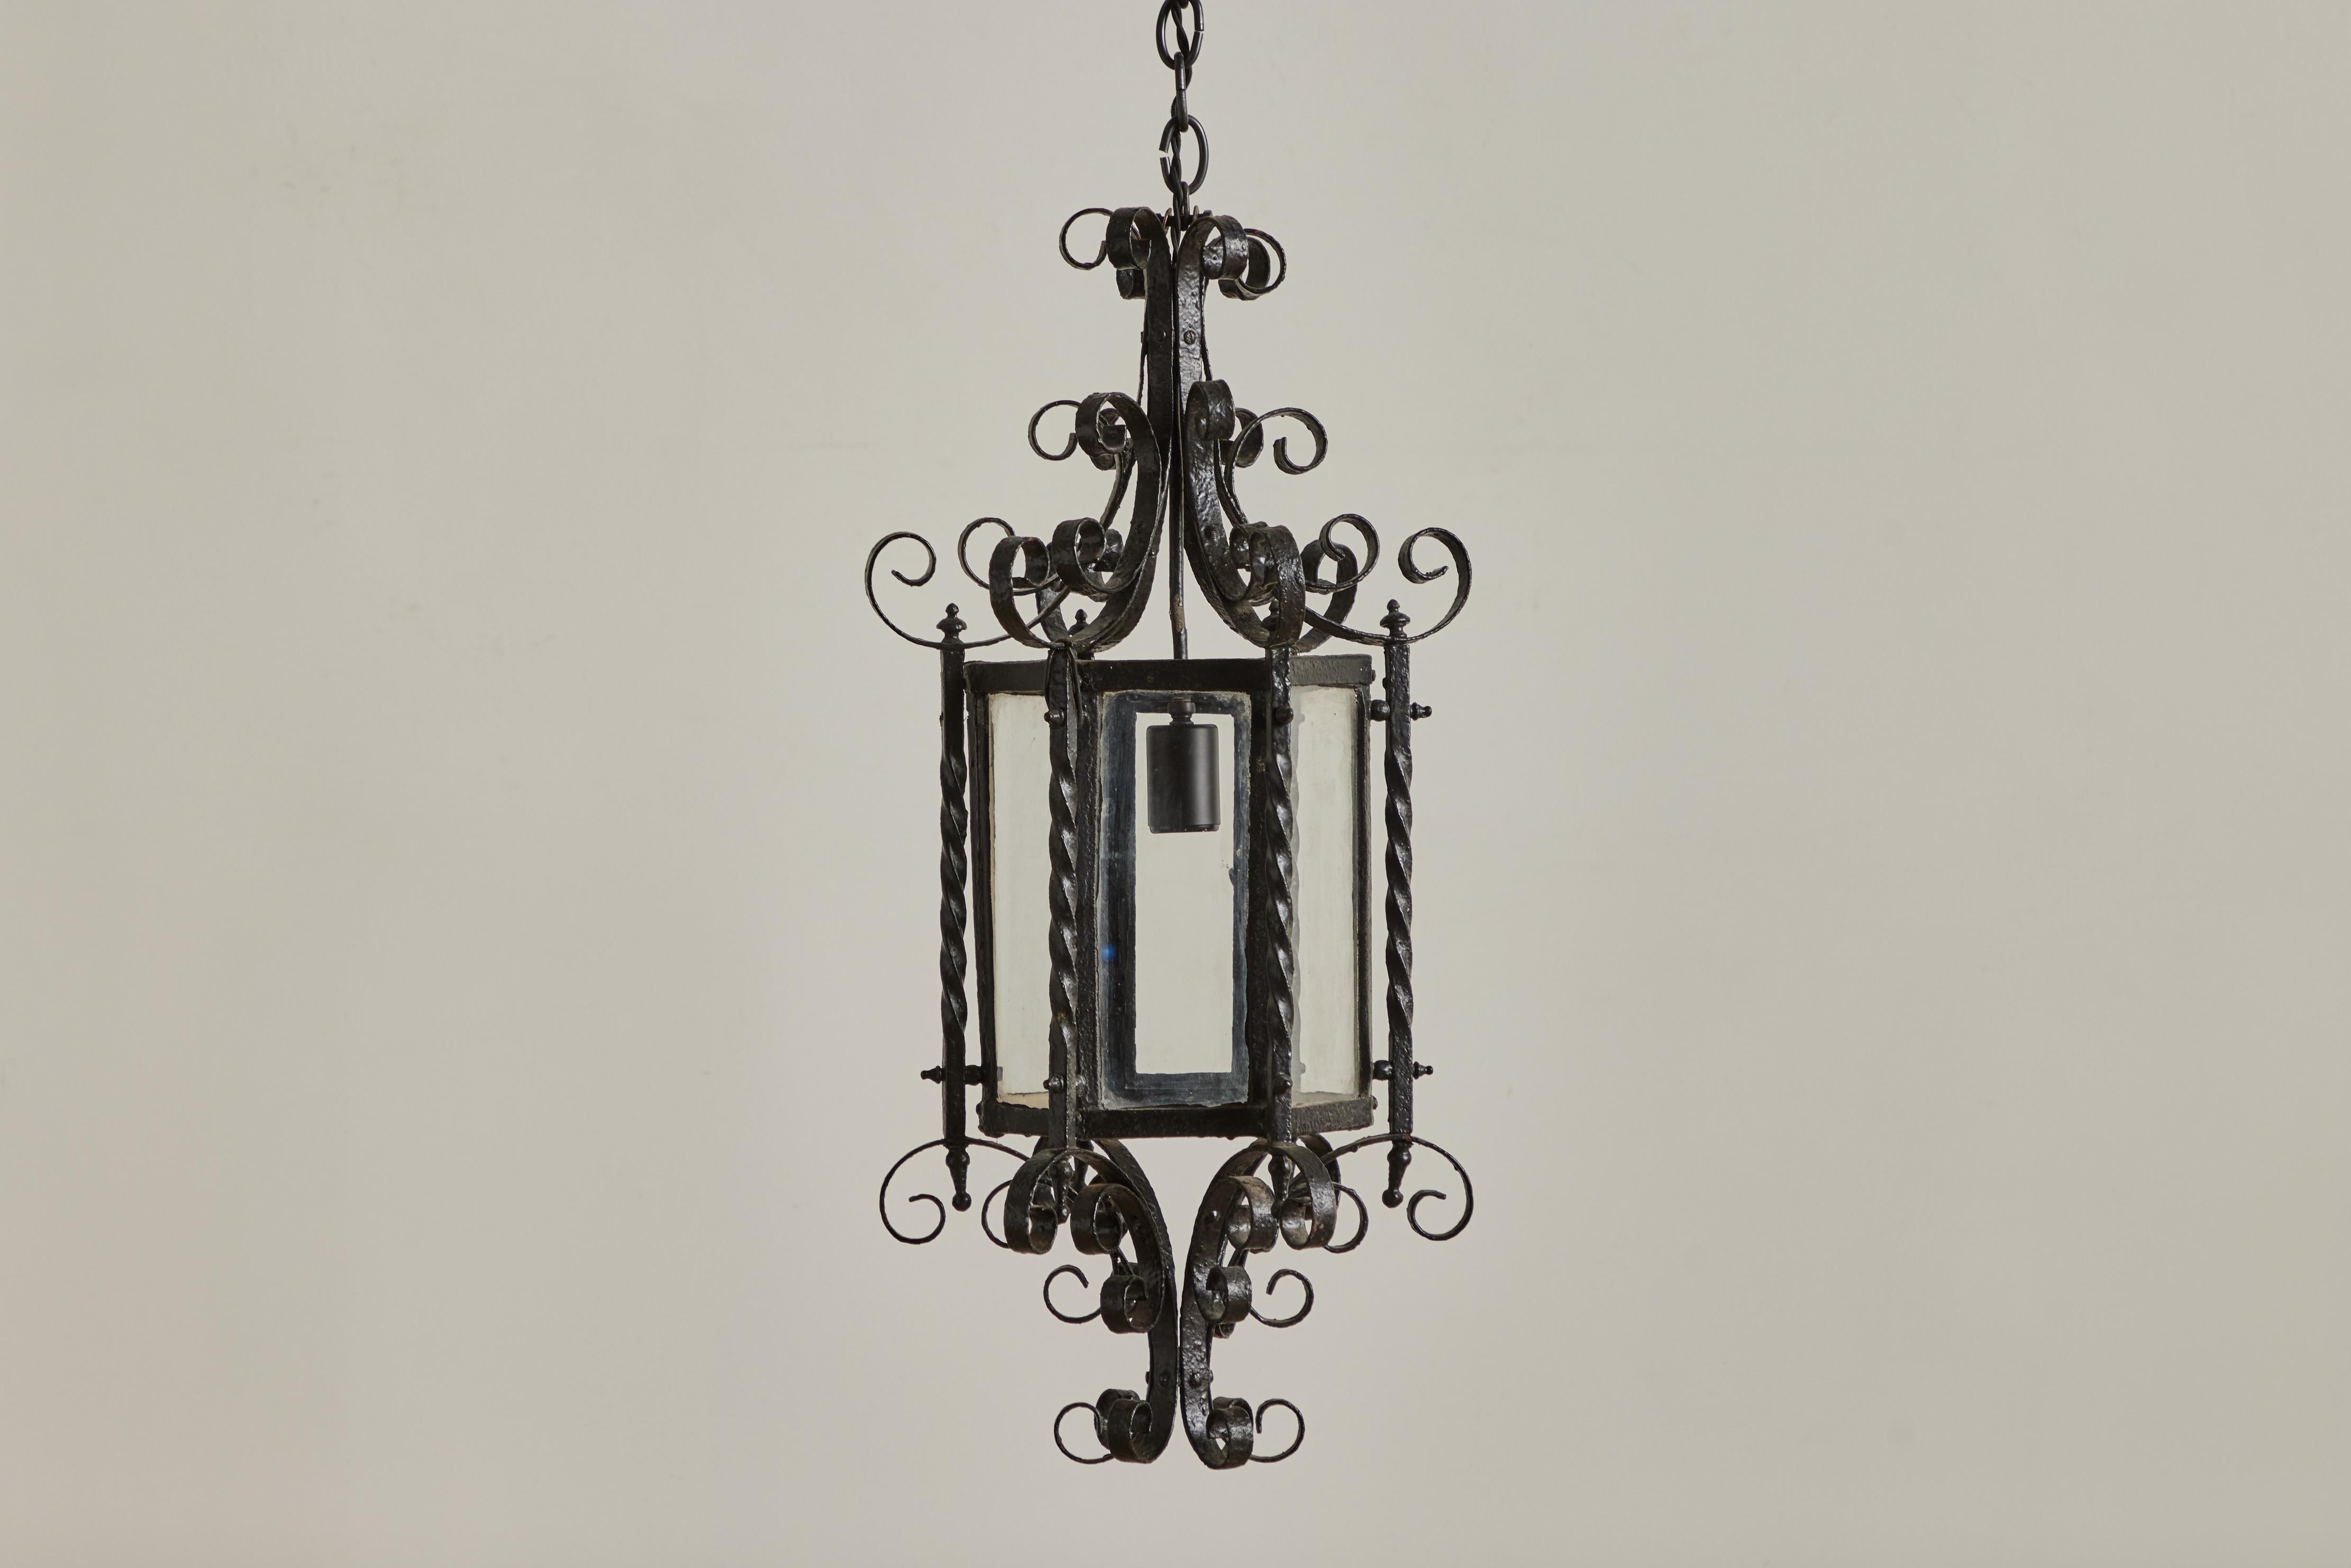 Iron and glass Gothic Revival pendant from France circa 1940. This pendant has been newly wired for hardwire installation and requires a standard E26 bulb. Visible wear on iron is consistent with age and use. 